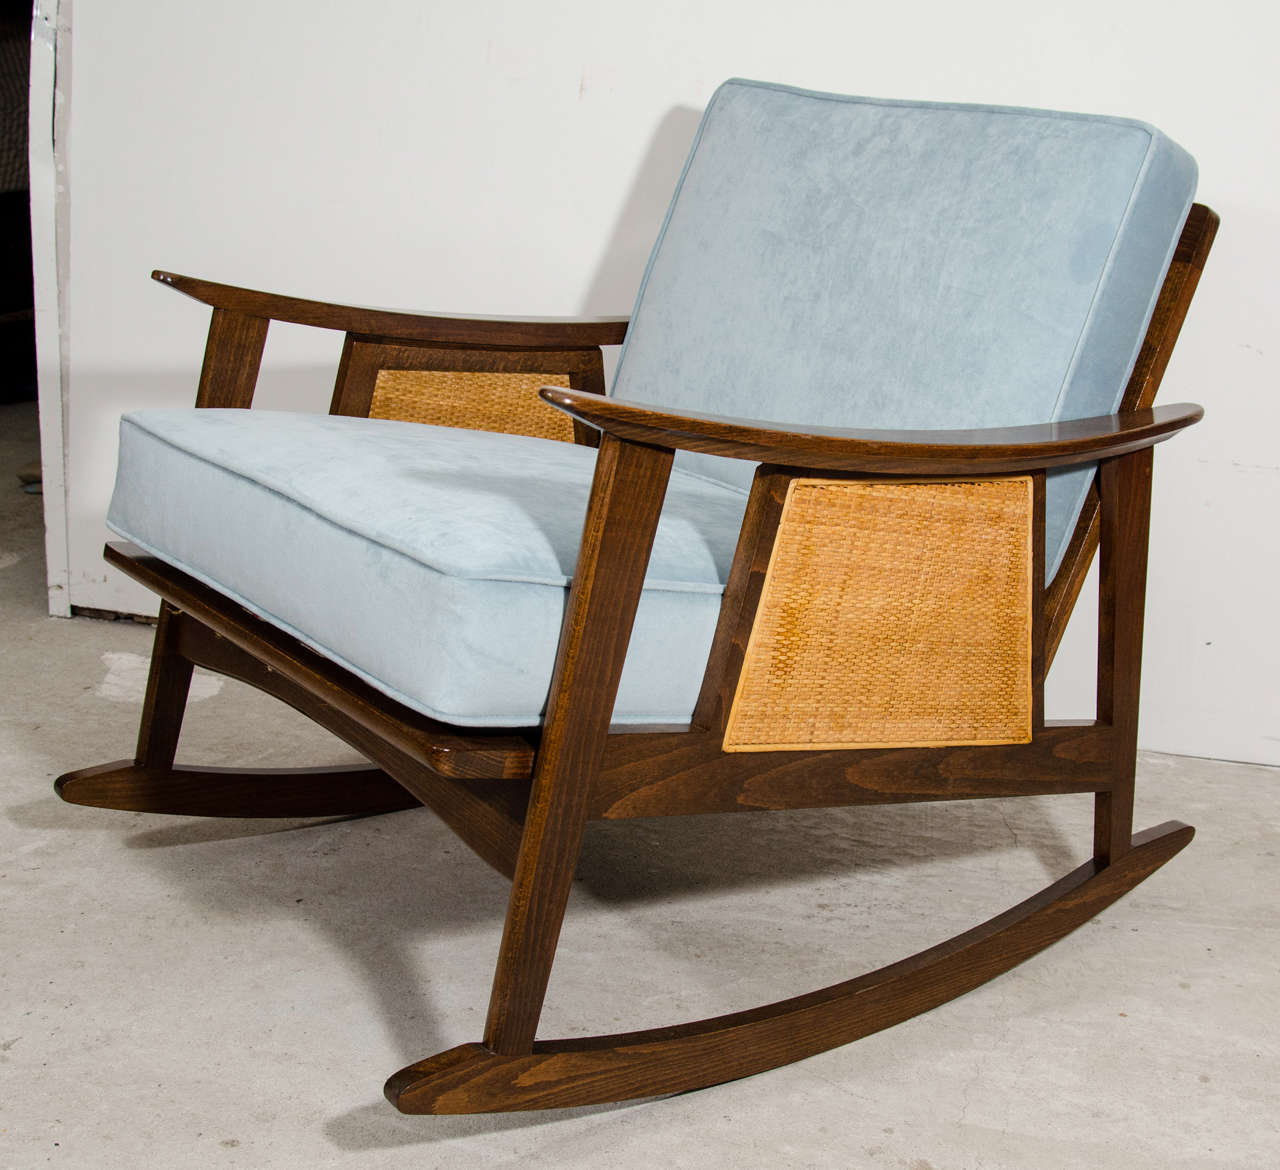 Pair of Mid Century Danish style rocking chair. Newly reupholstered in blue velvet fabric. New webbing support straps below and new finishing. Retro lounge chair. Kick back with a book, Kindle, or baby in the nursery.